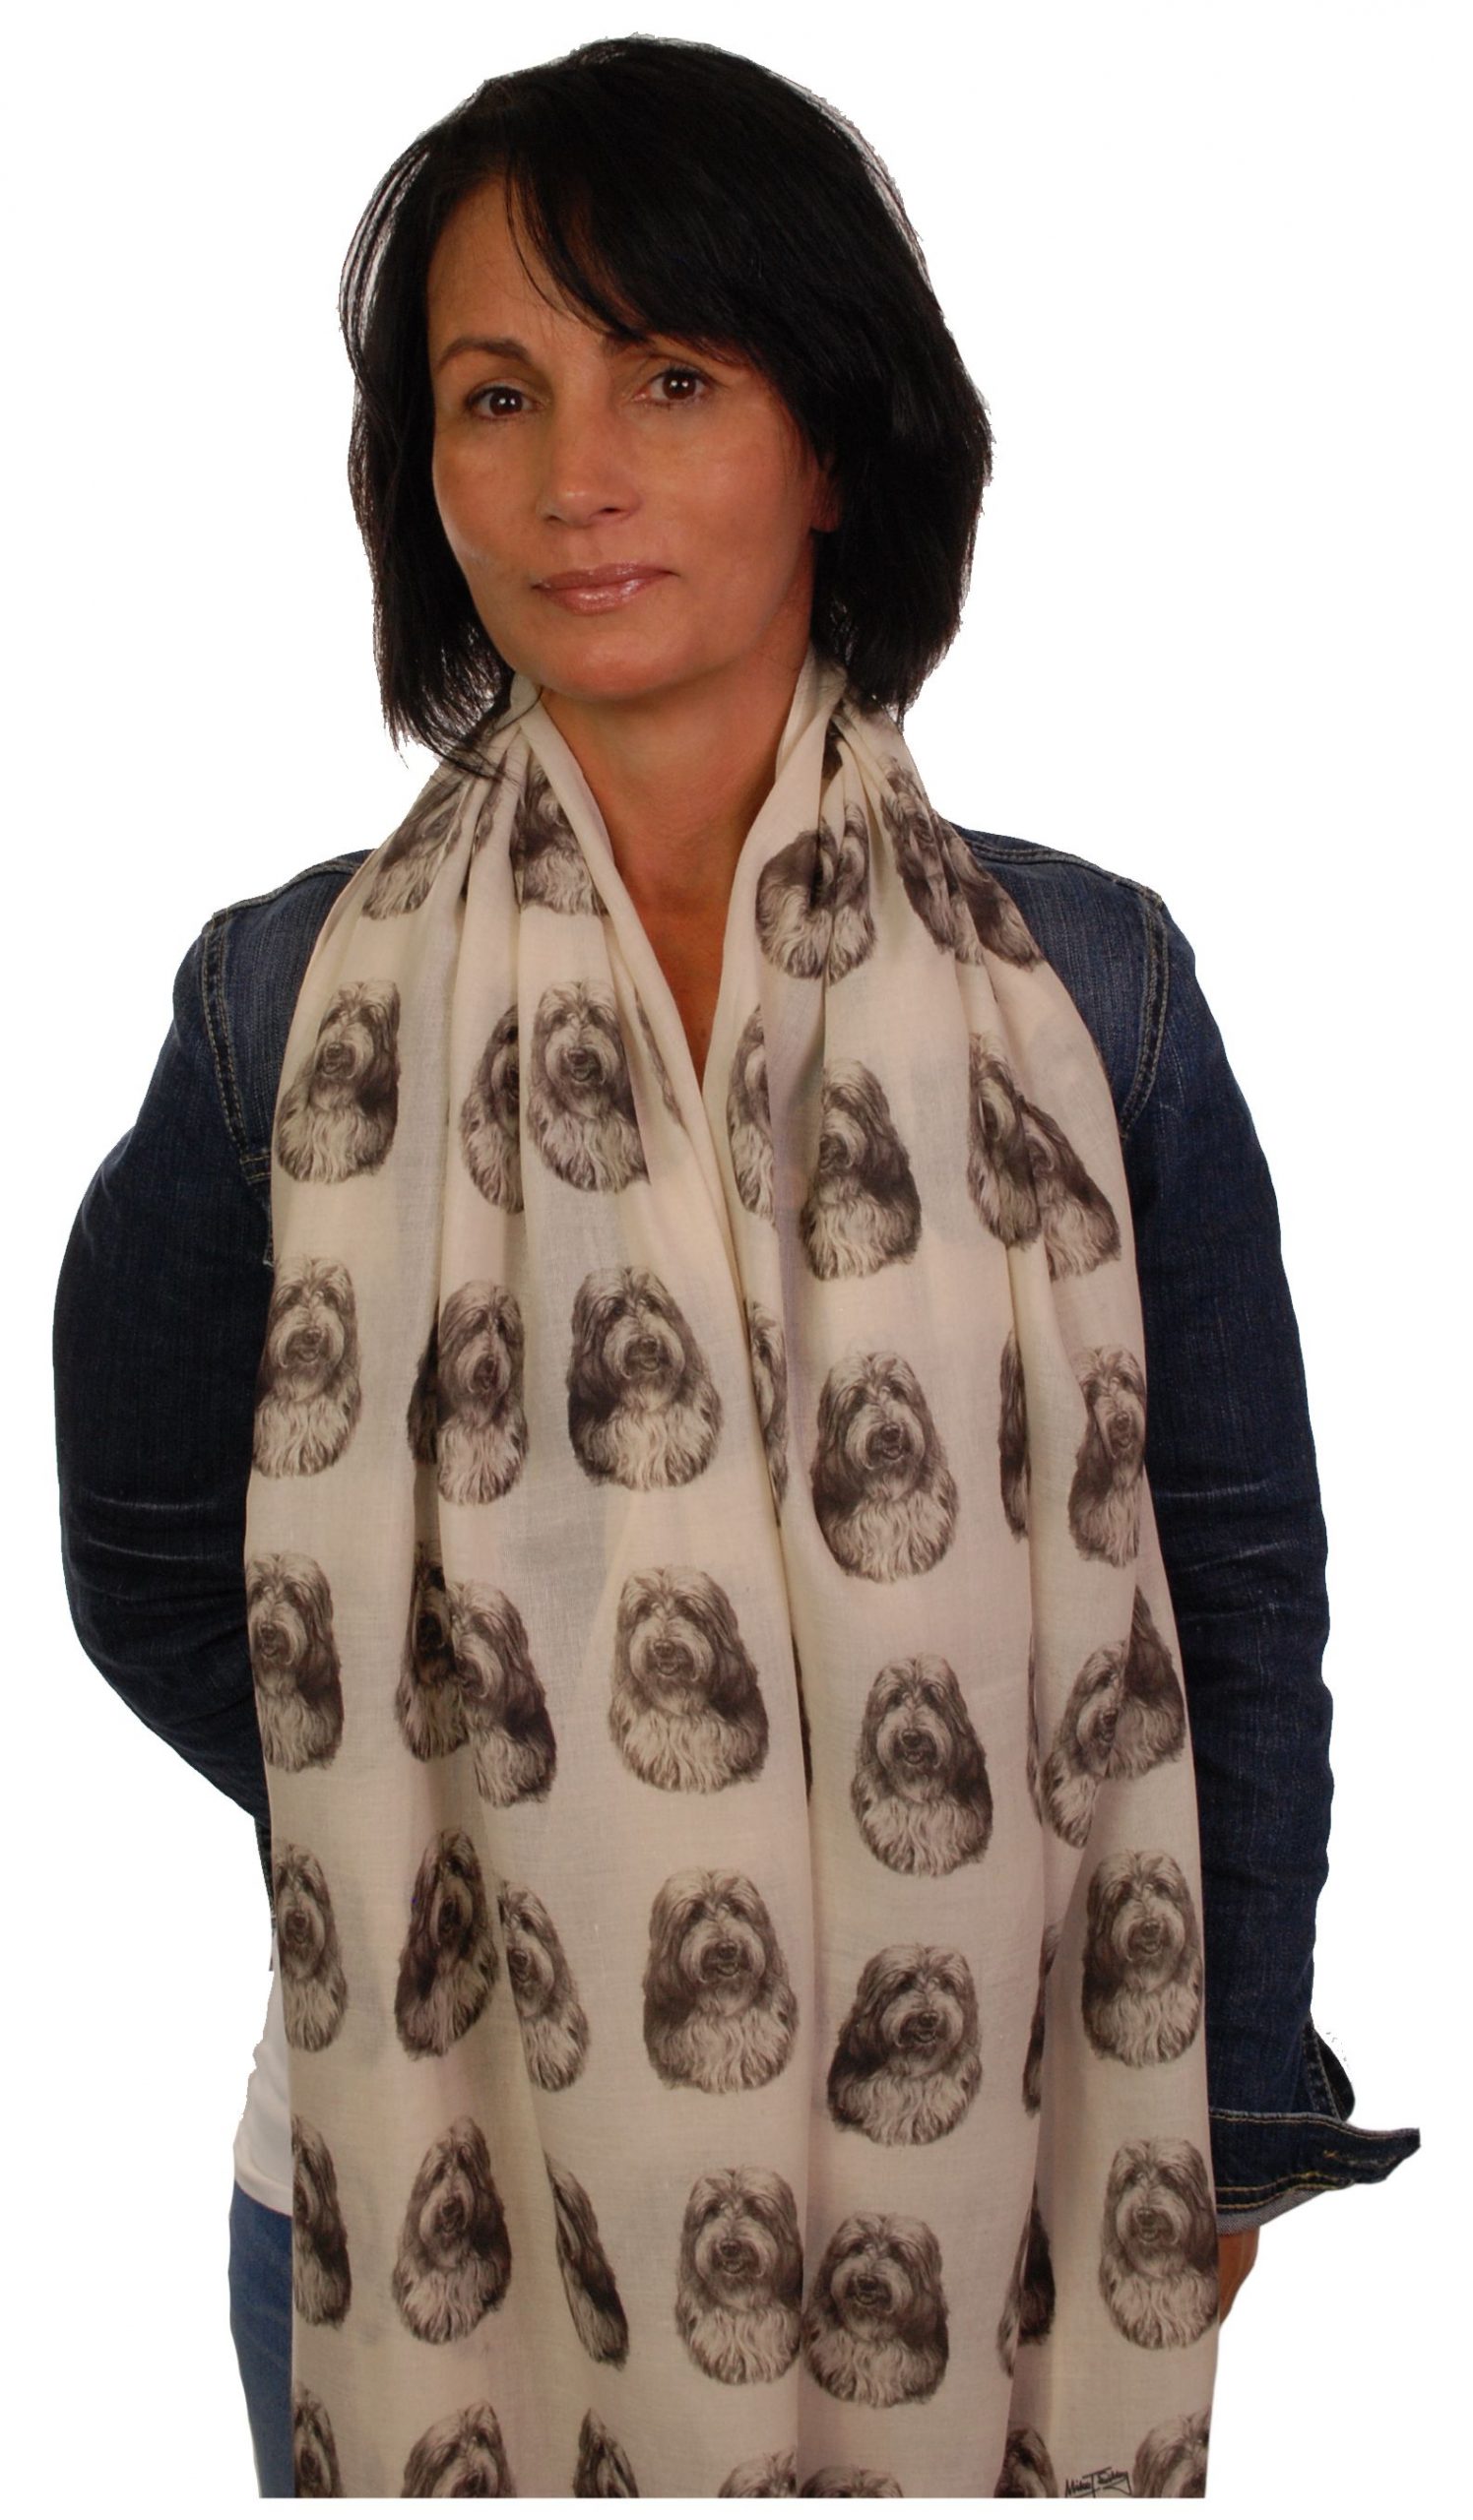 Mike Sibley Bearded Collie licensed design ladies fashion scarf